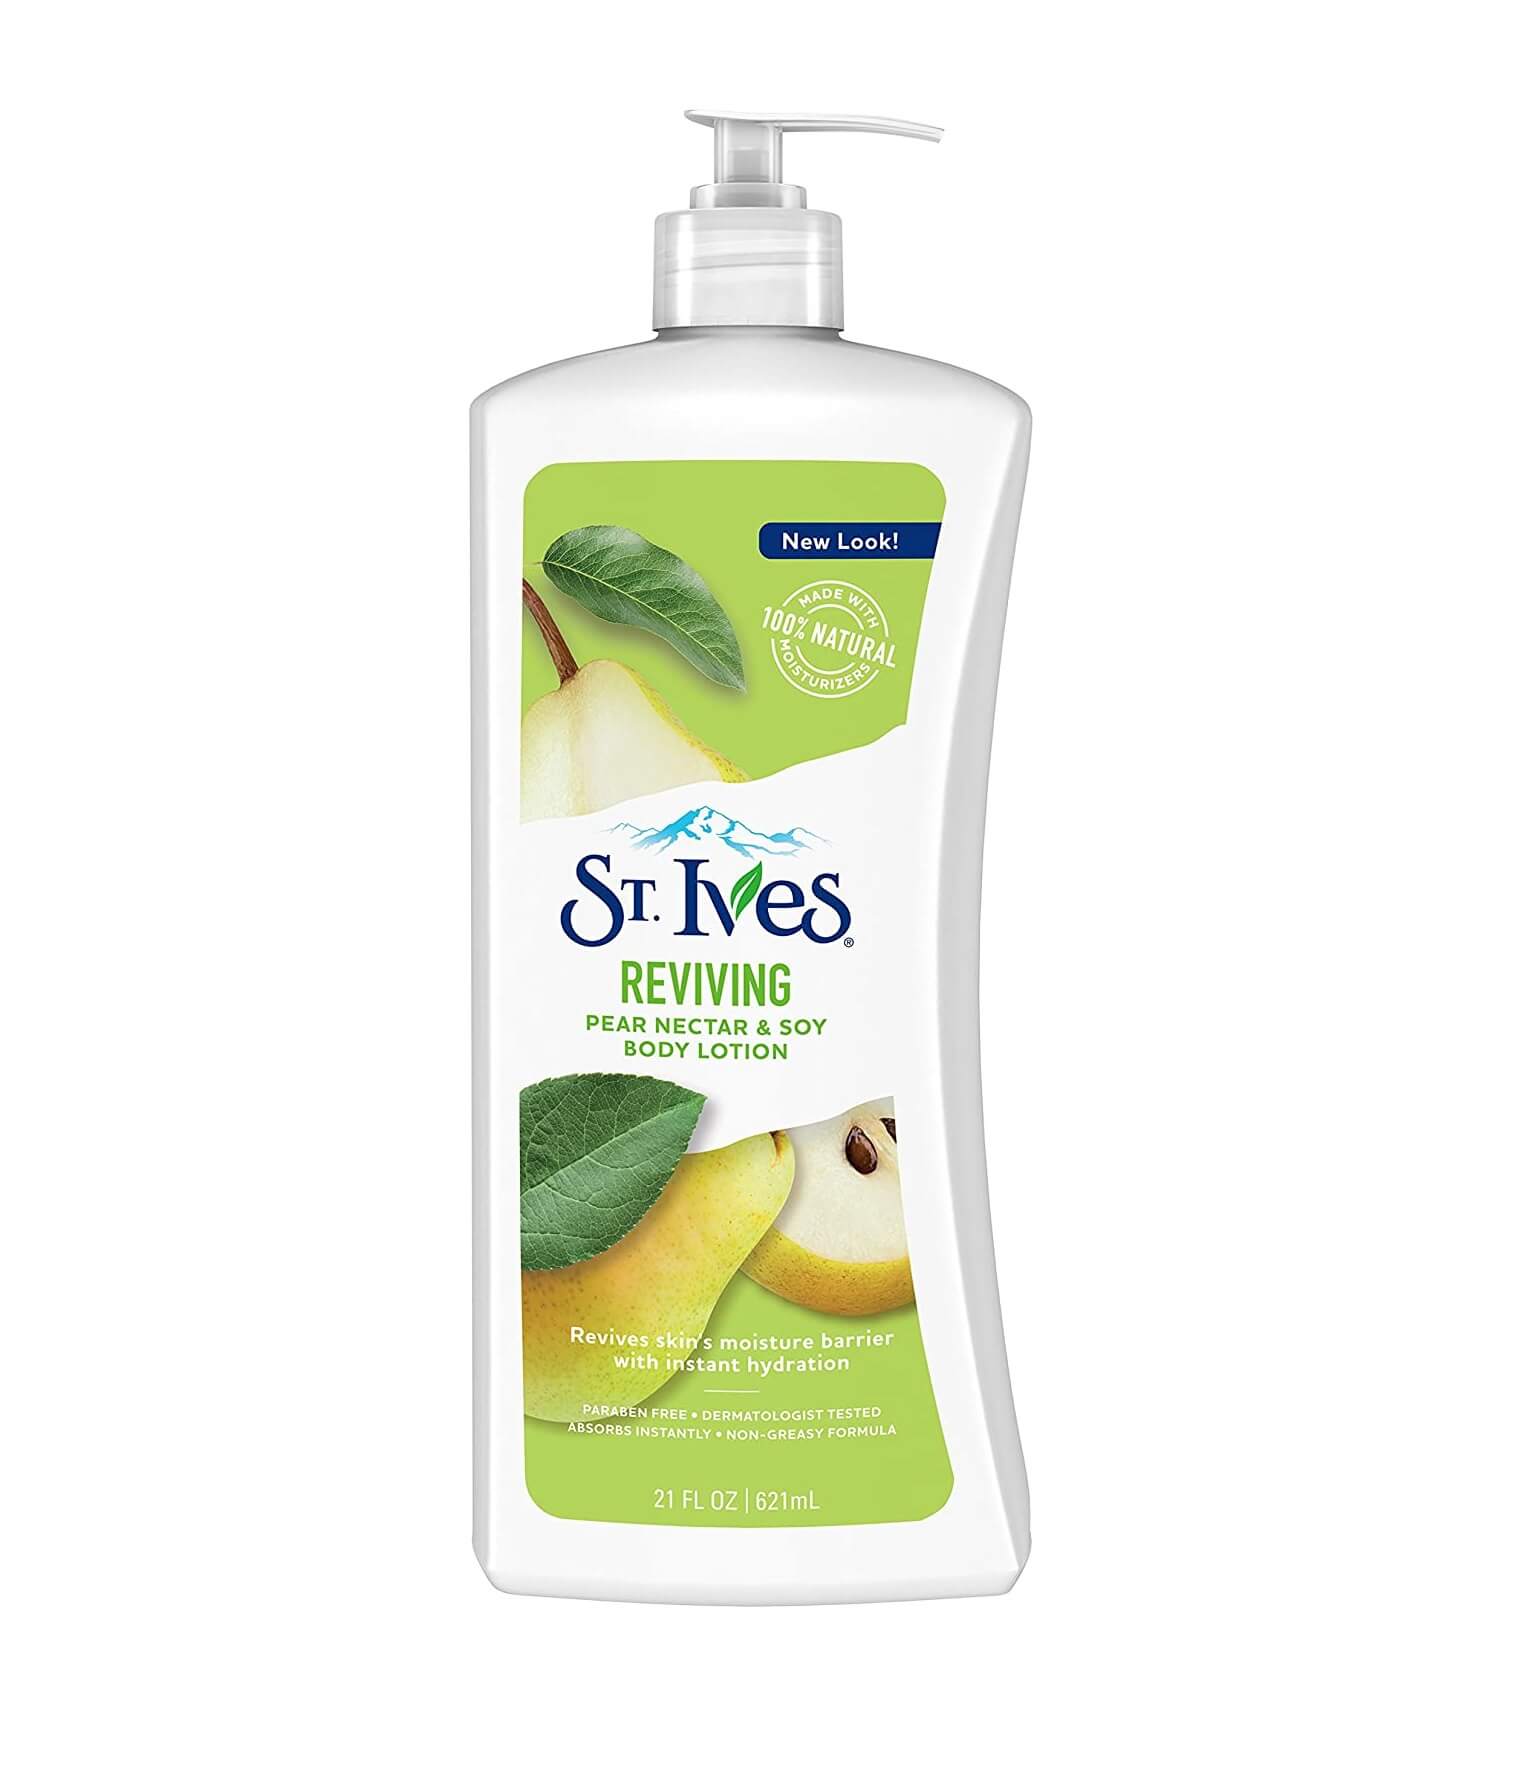 St. Ives Refresh and Revive Pear Nectar and Soy Body Lotion 621ml